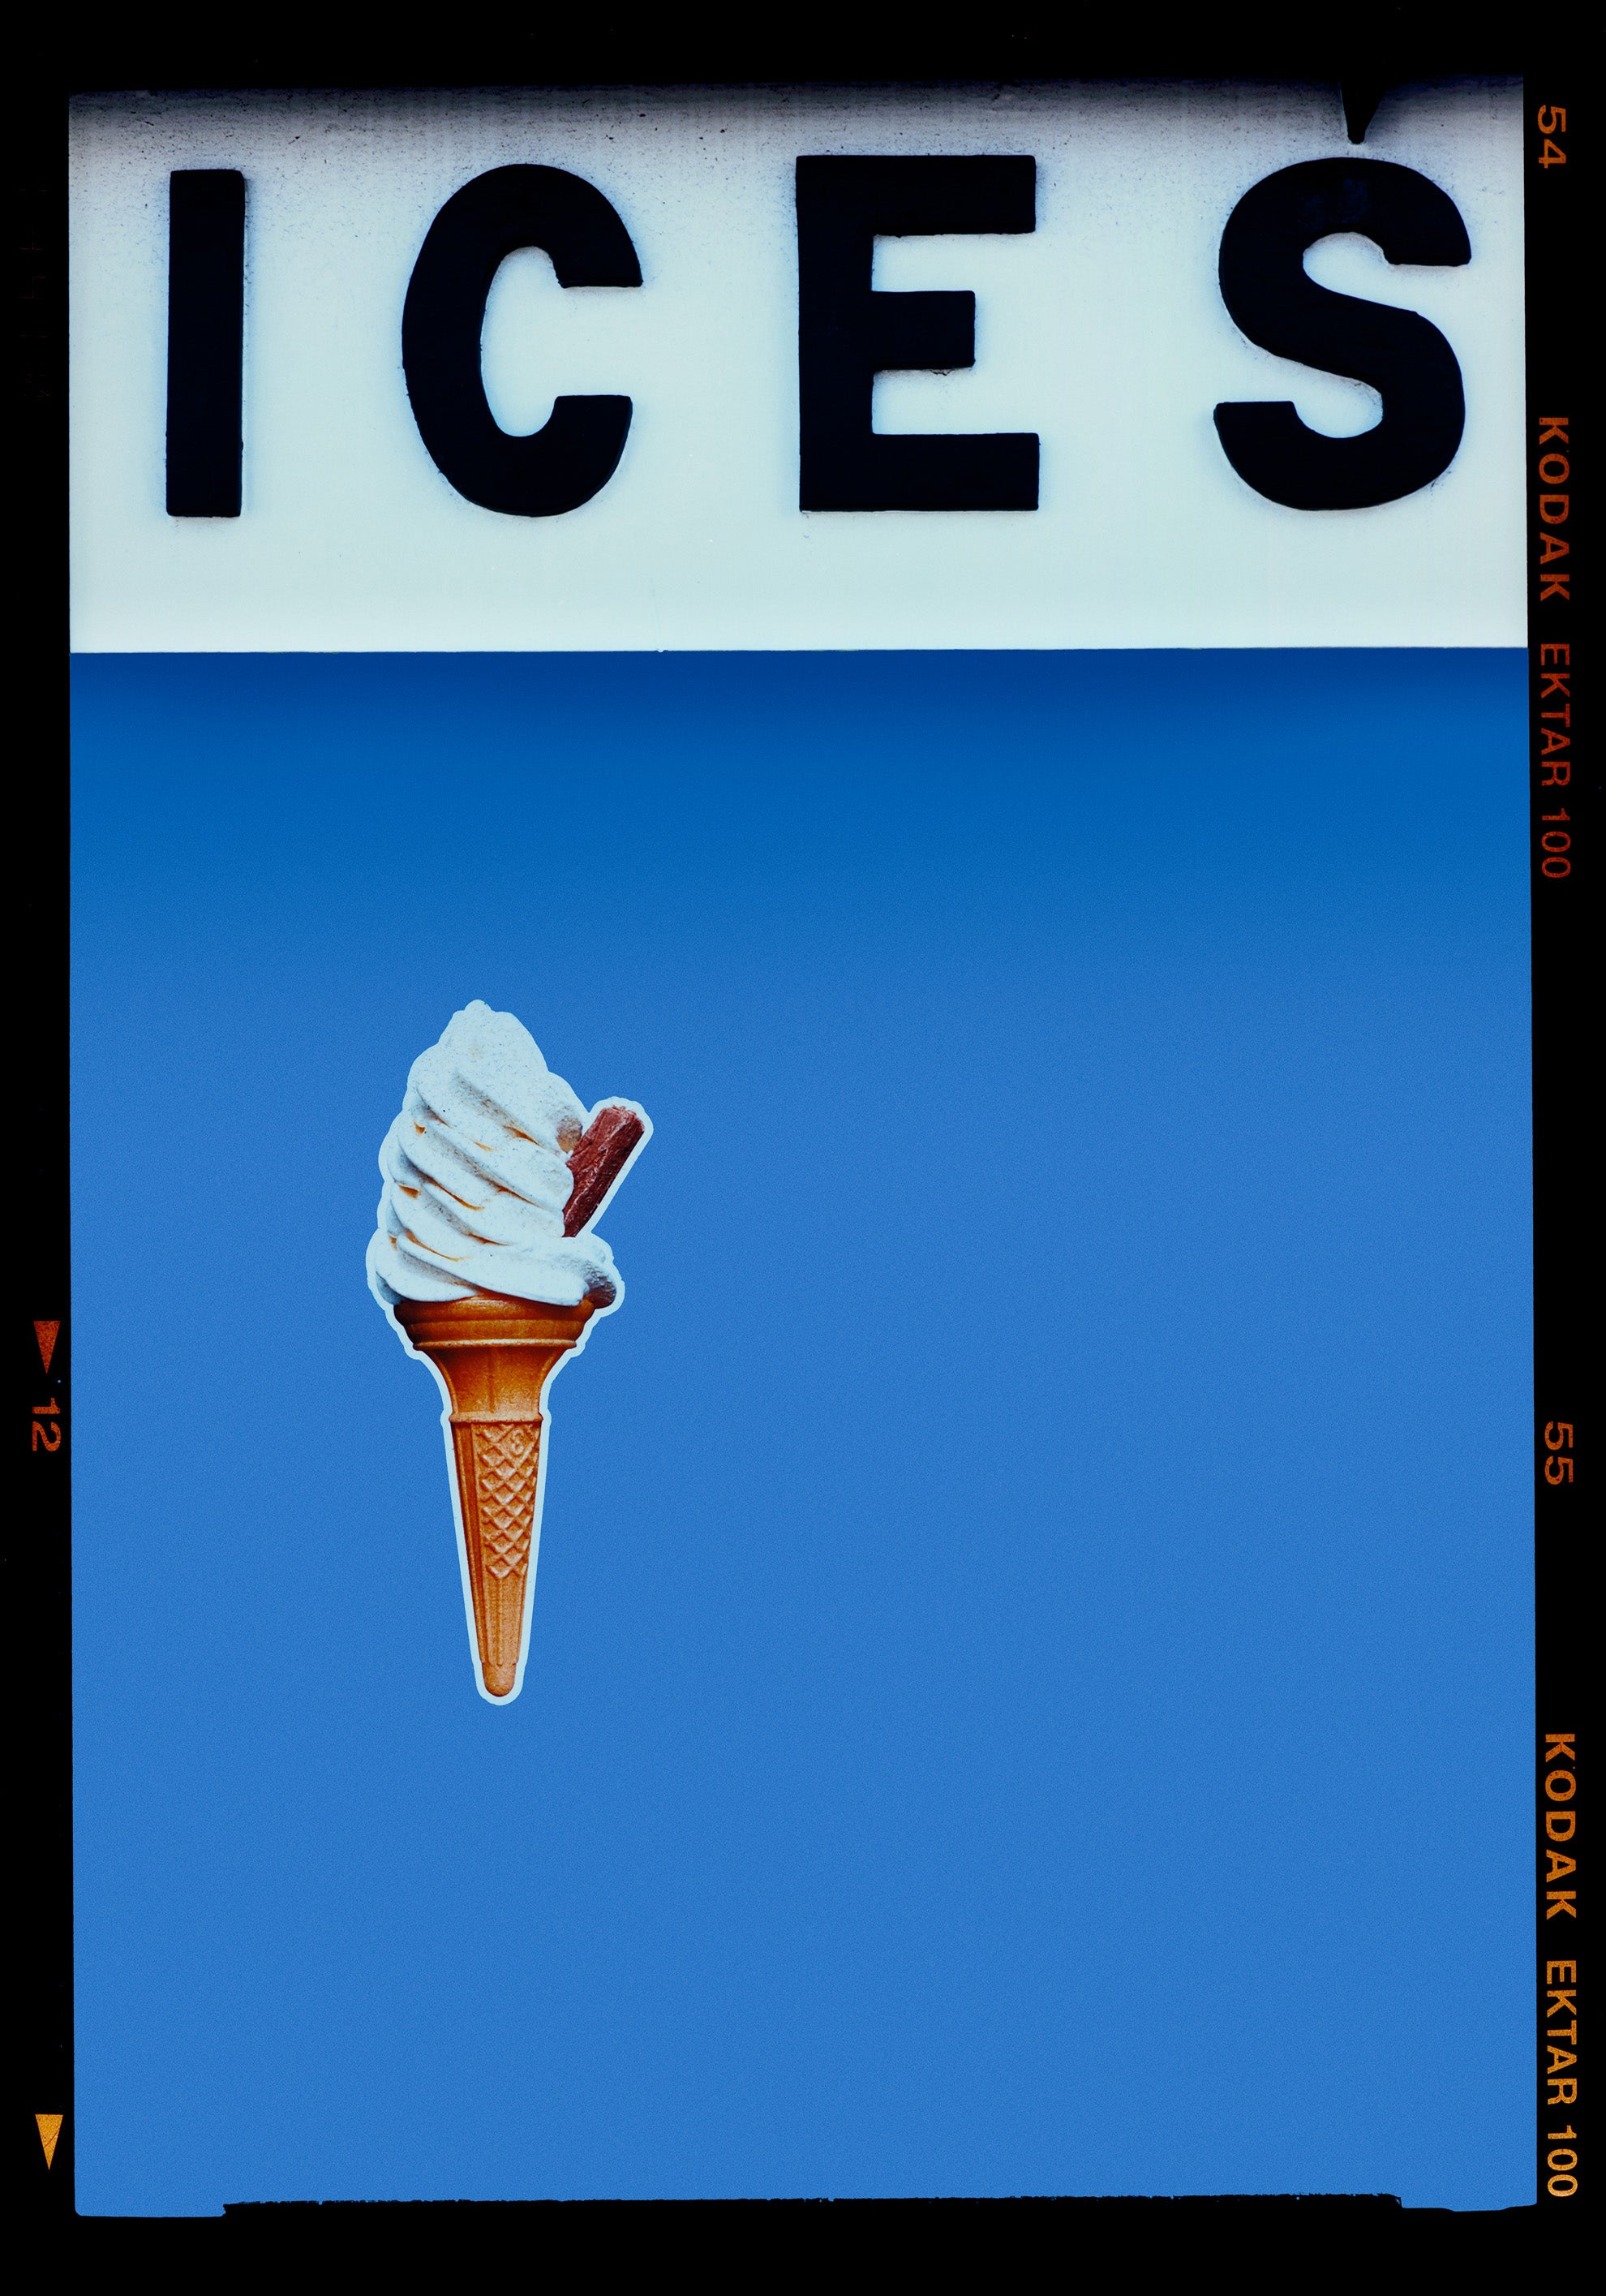 Photograph by Richard Heeps.  At the top black letters spell out ICES and below is depicted a 99 icecream cone sitting left of centre against a Baby Blue coloured background.  